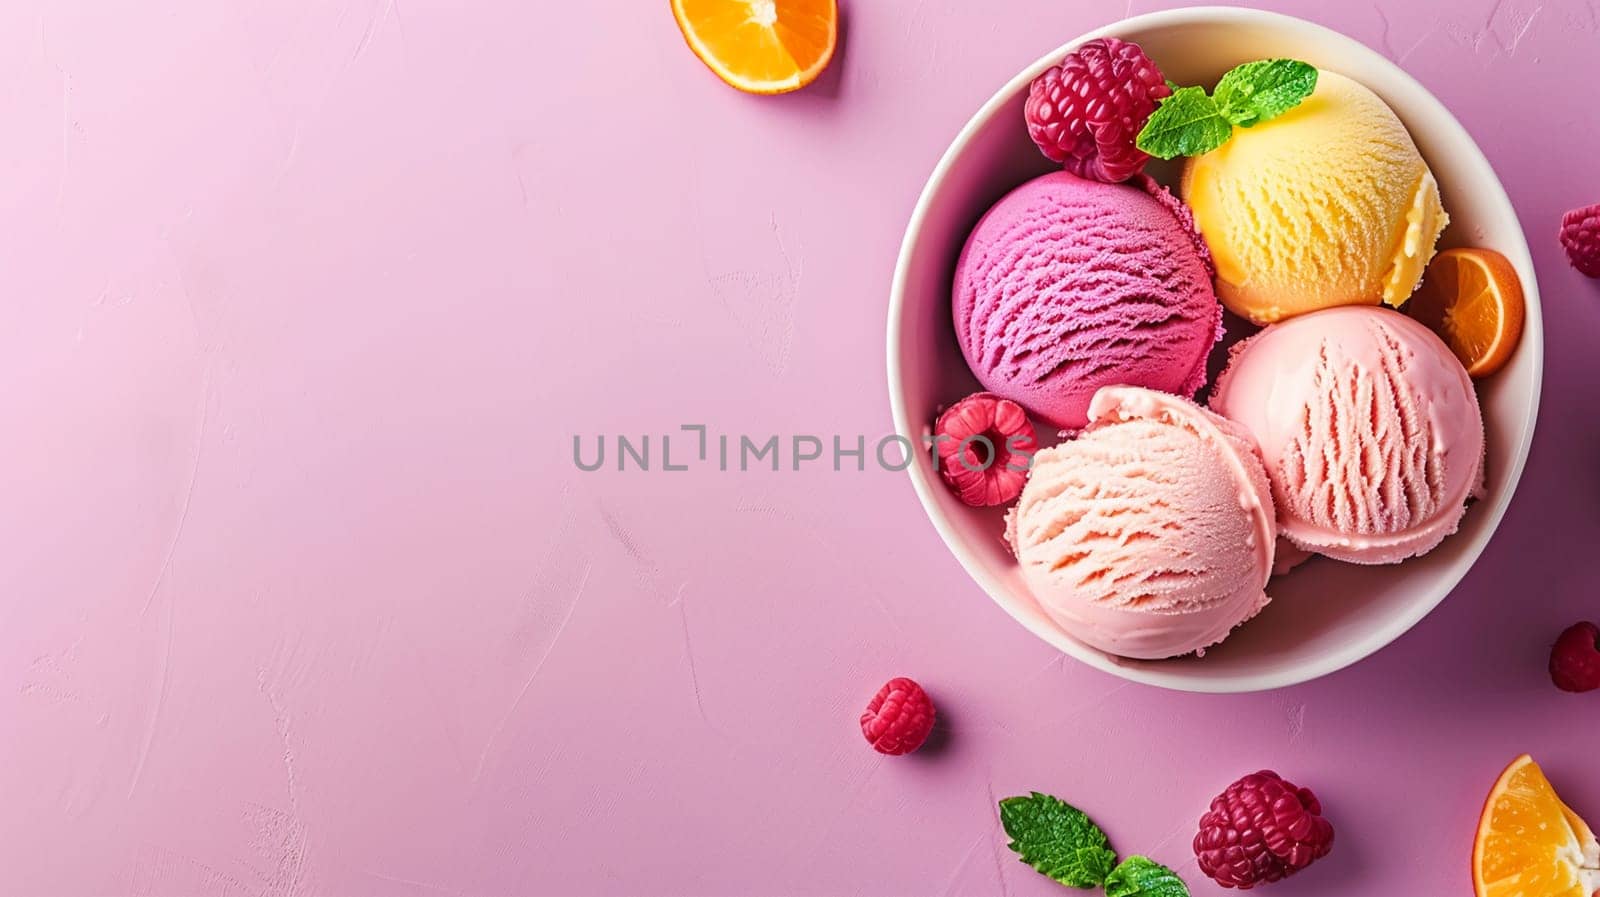 Overhead view featuring scoops of raspberry and orange ice cream dessert, vibrant pink backdrop, perfect summer treat with copy space